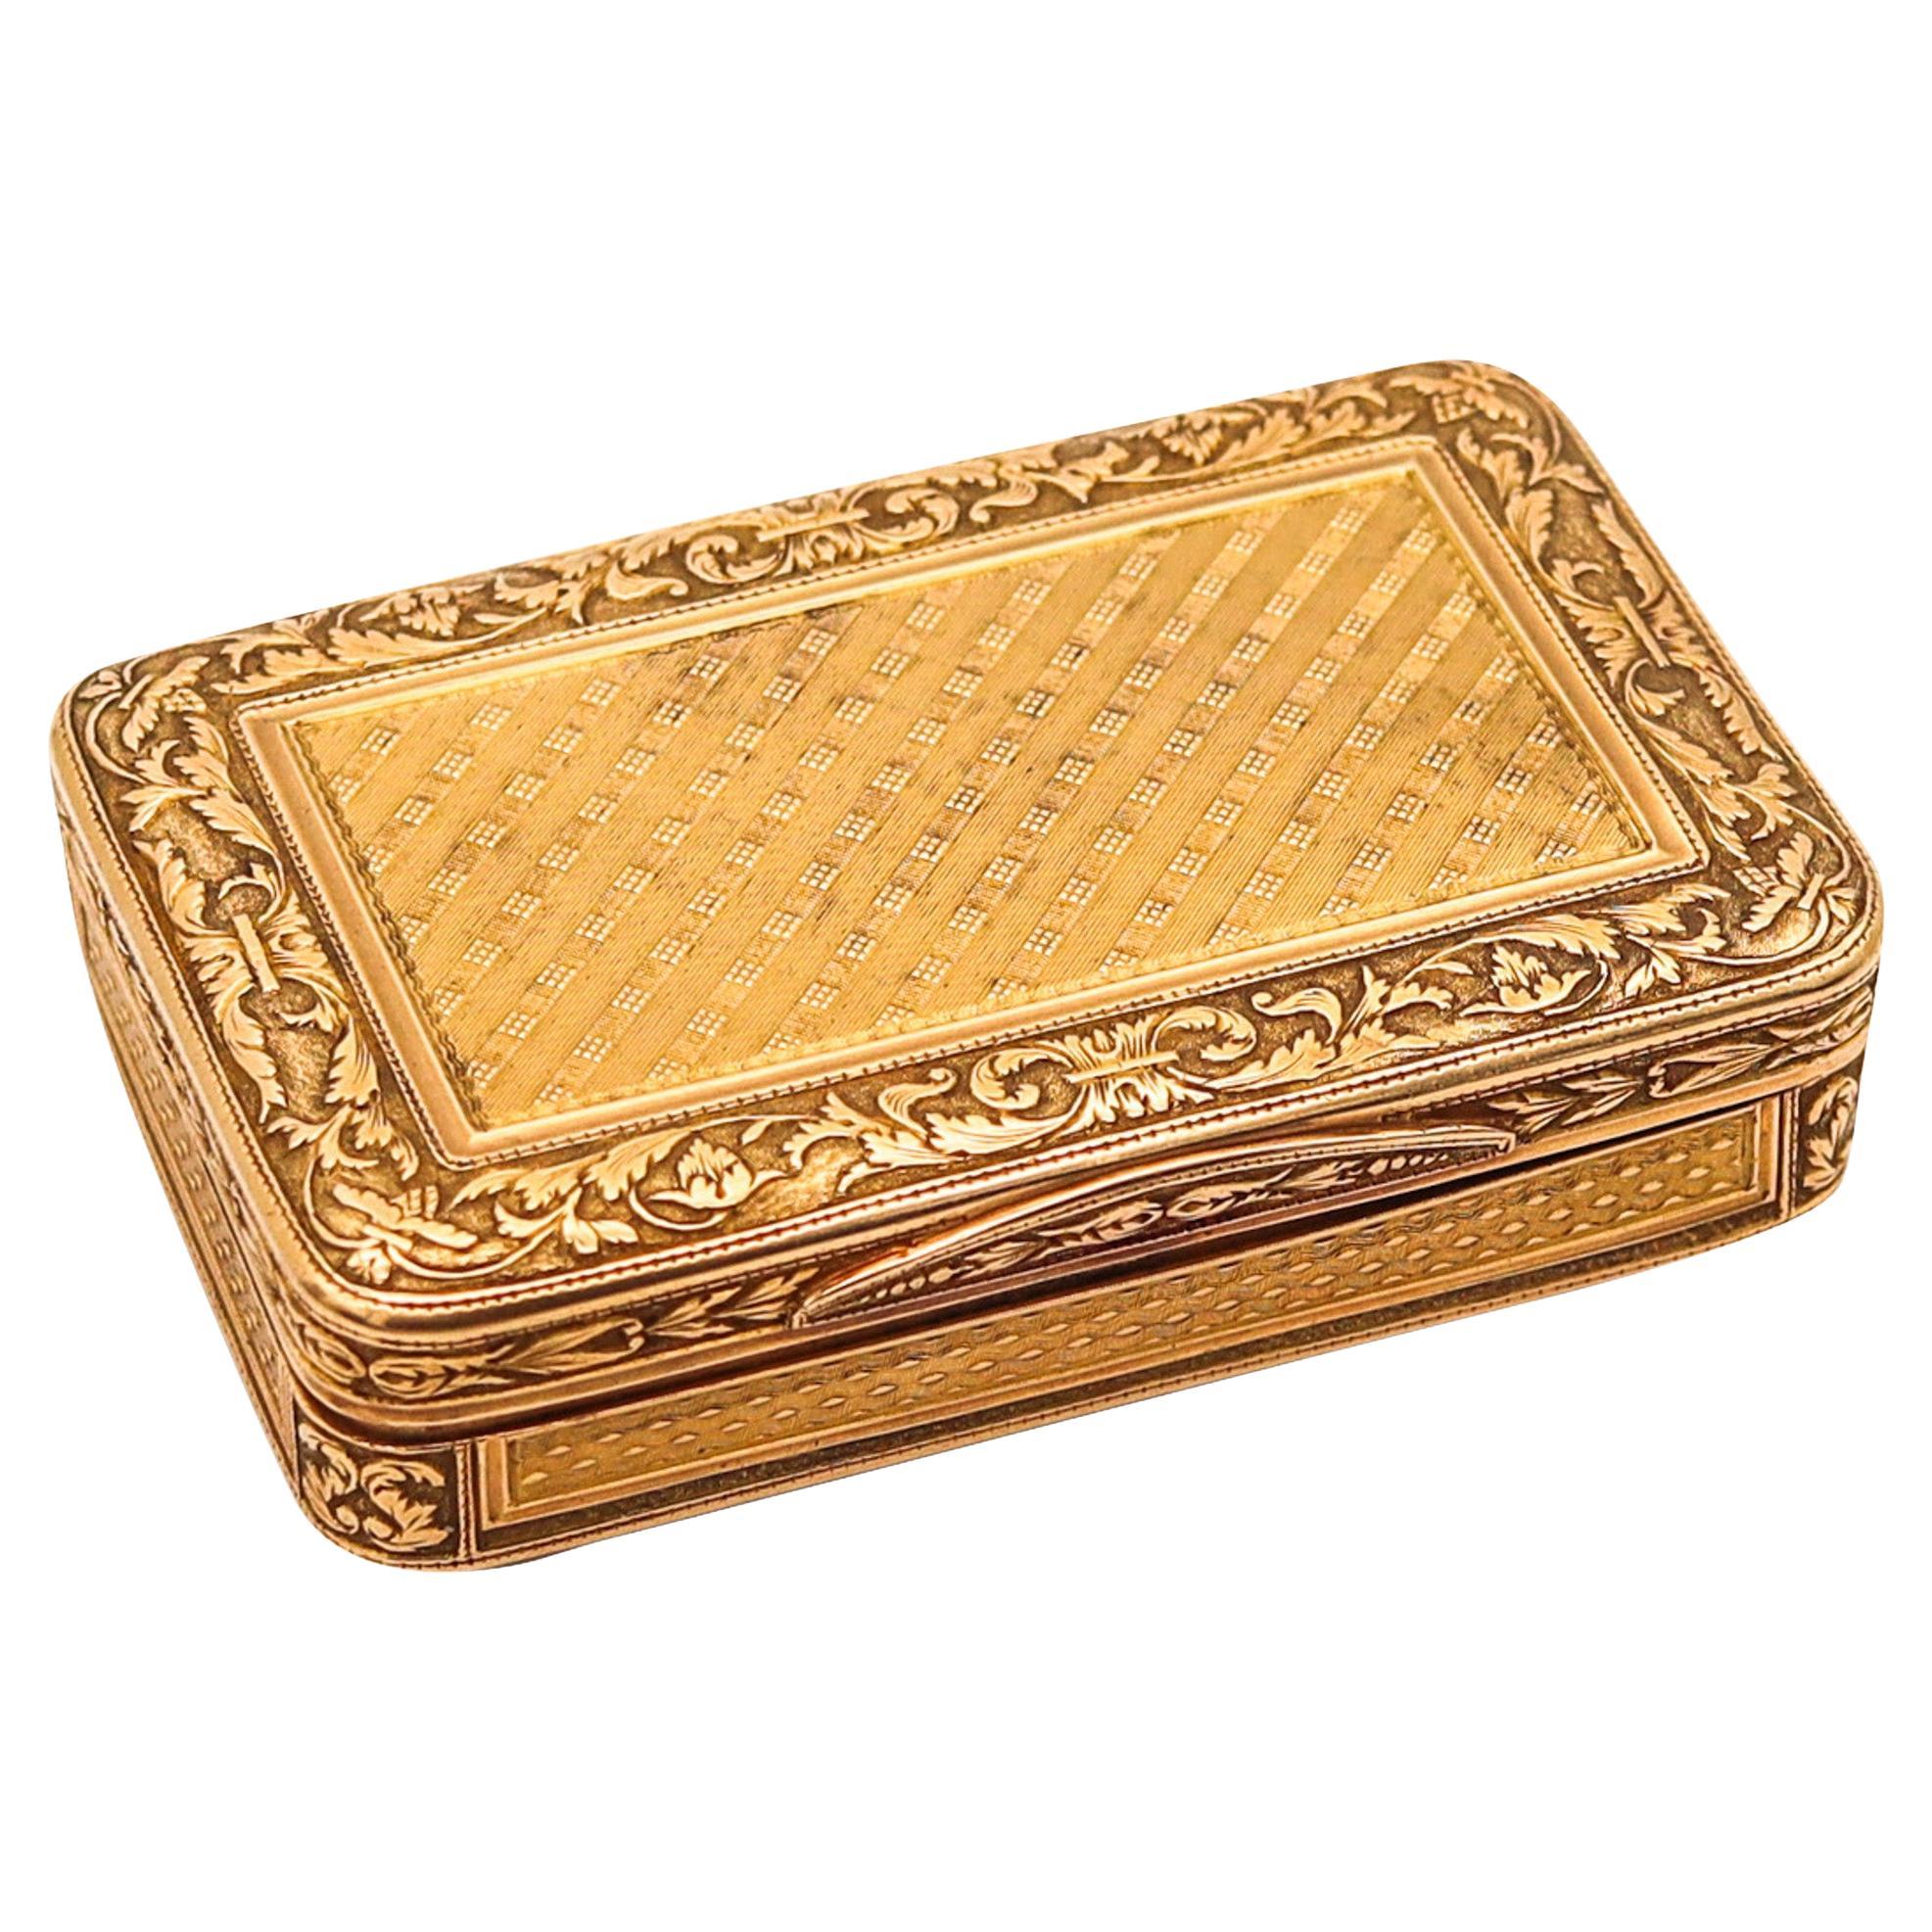 French 1790 Neoclassical Louis XVI Rectangular Snuff Box in Labrated 18kt Gold For Sale